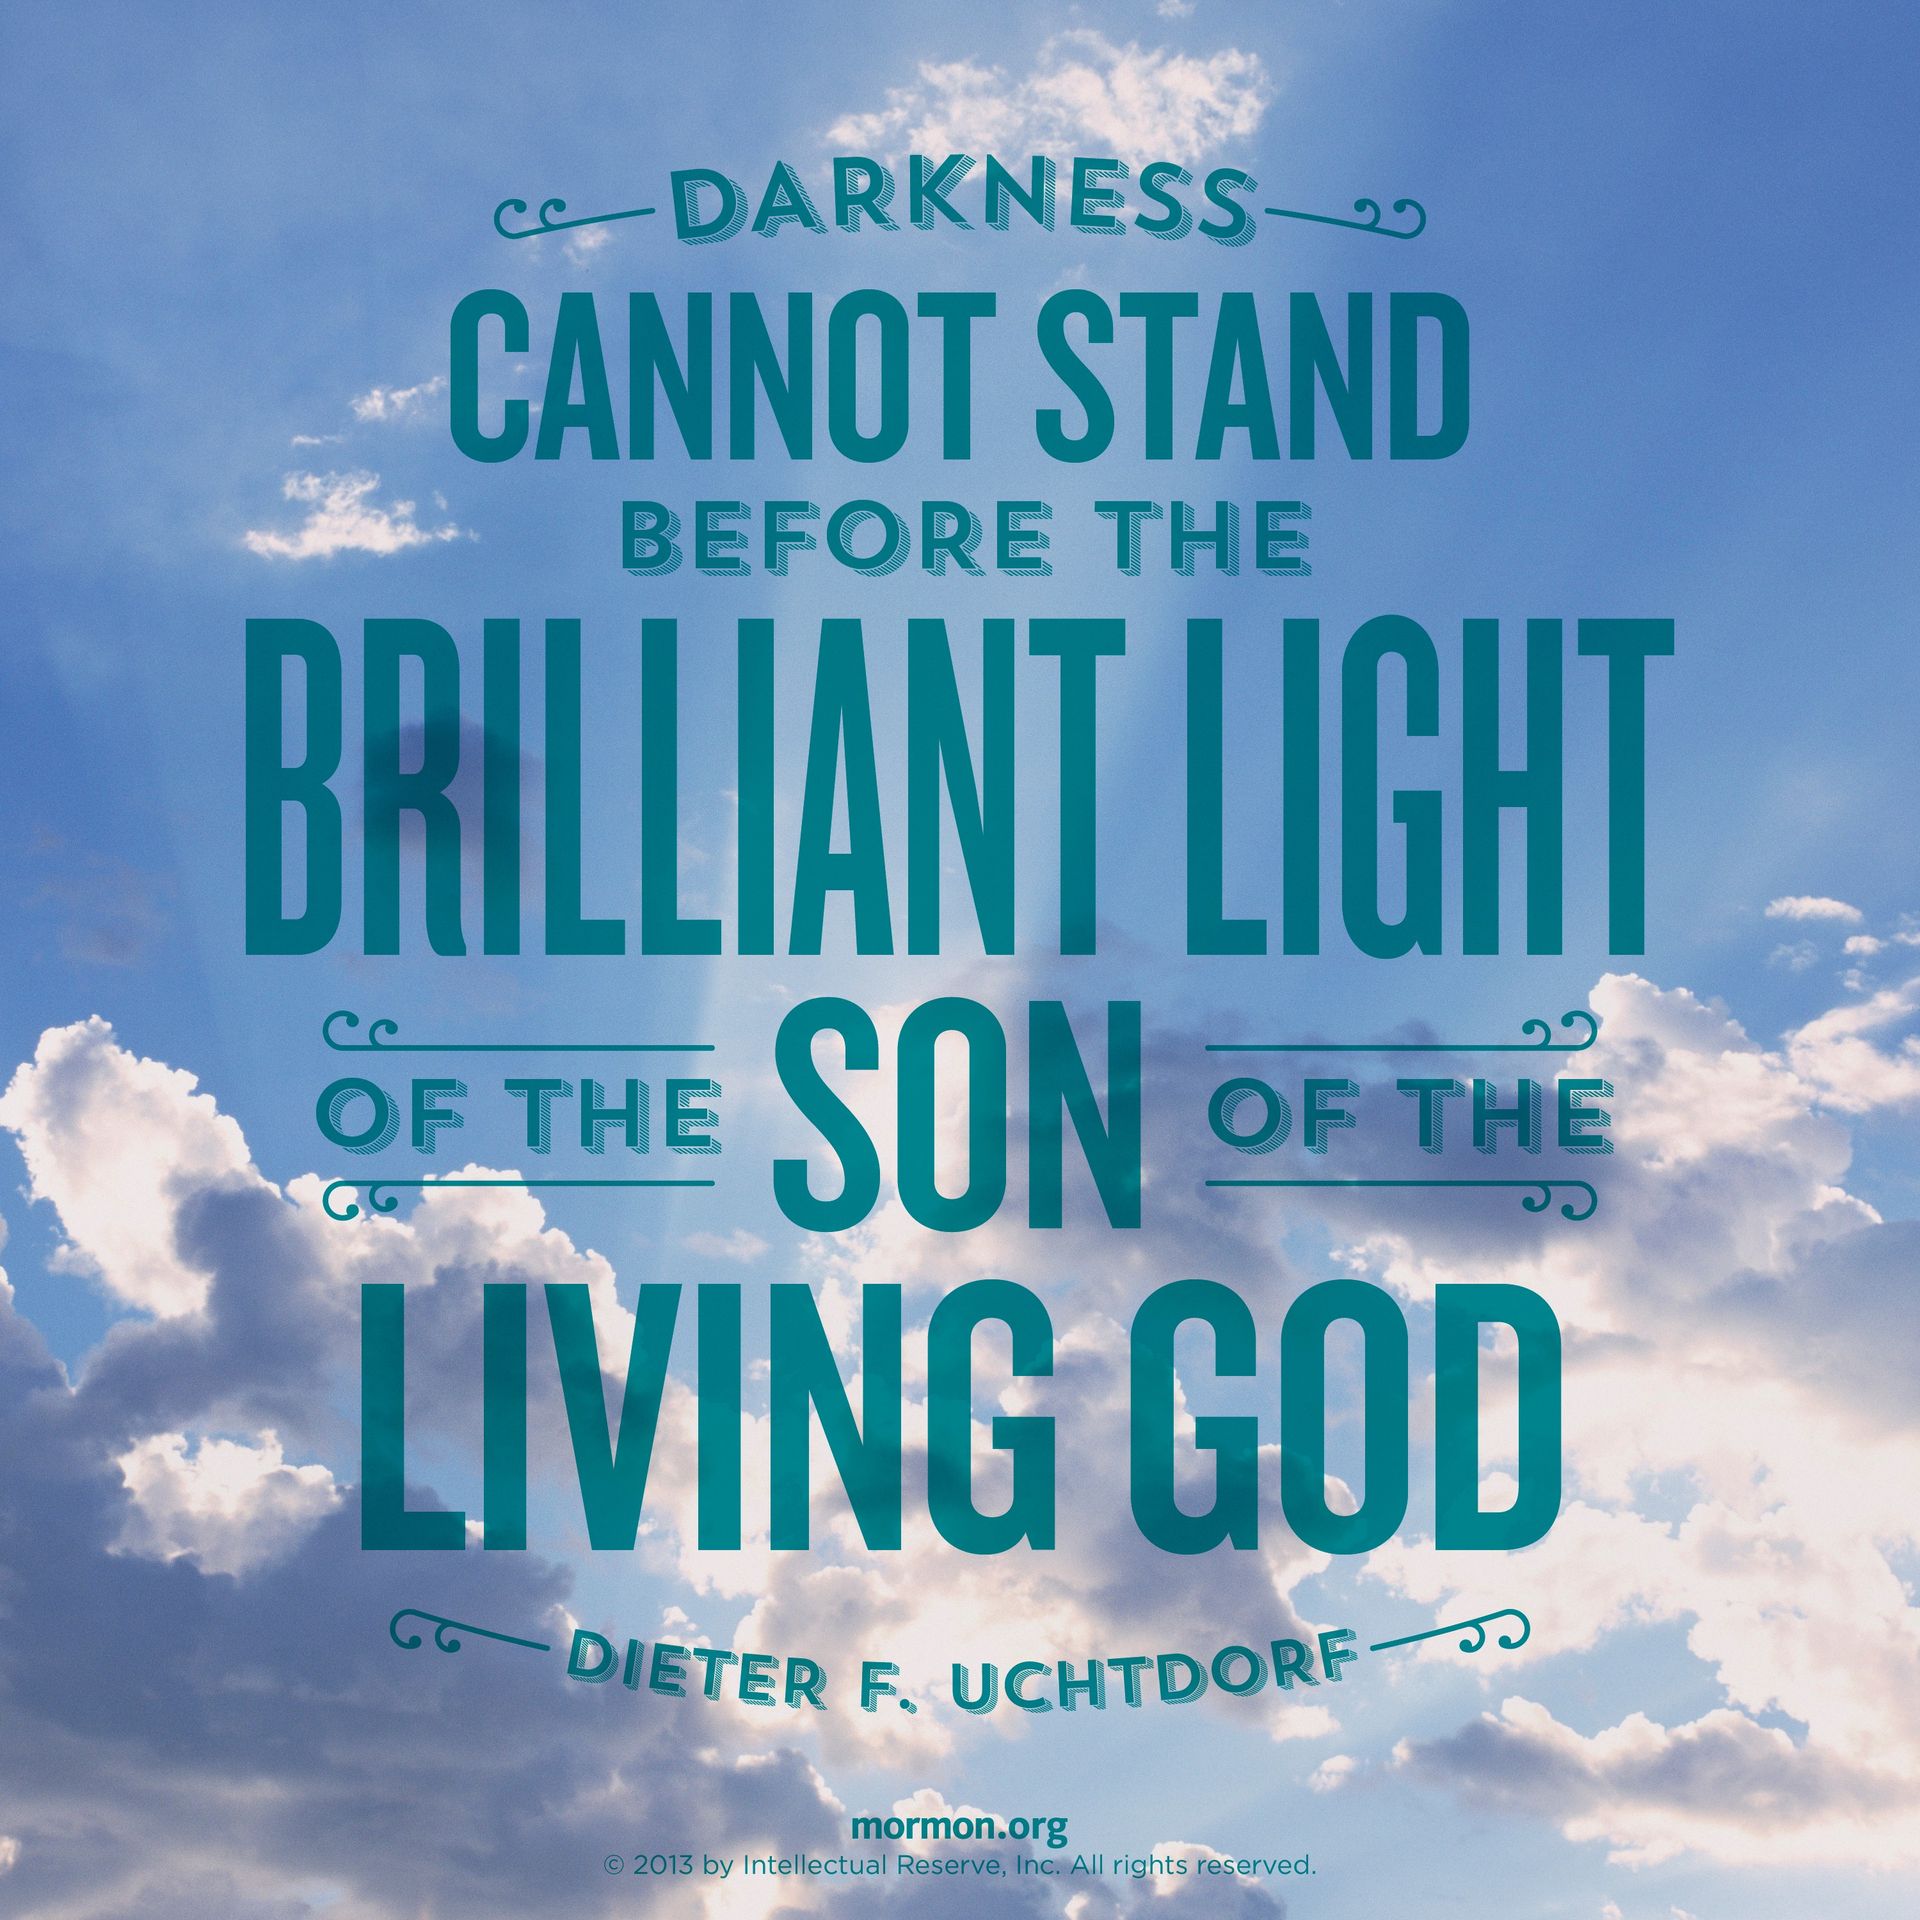 “Darkness cannot stand before the brilliant light of the Son of the living God!”—President Dieter F. Uchtdorf, “The Hope of God’s Light”